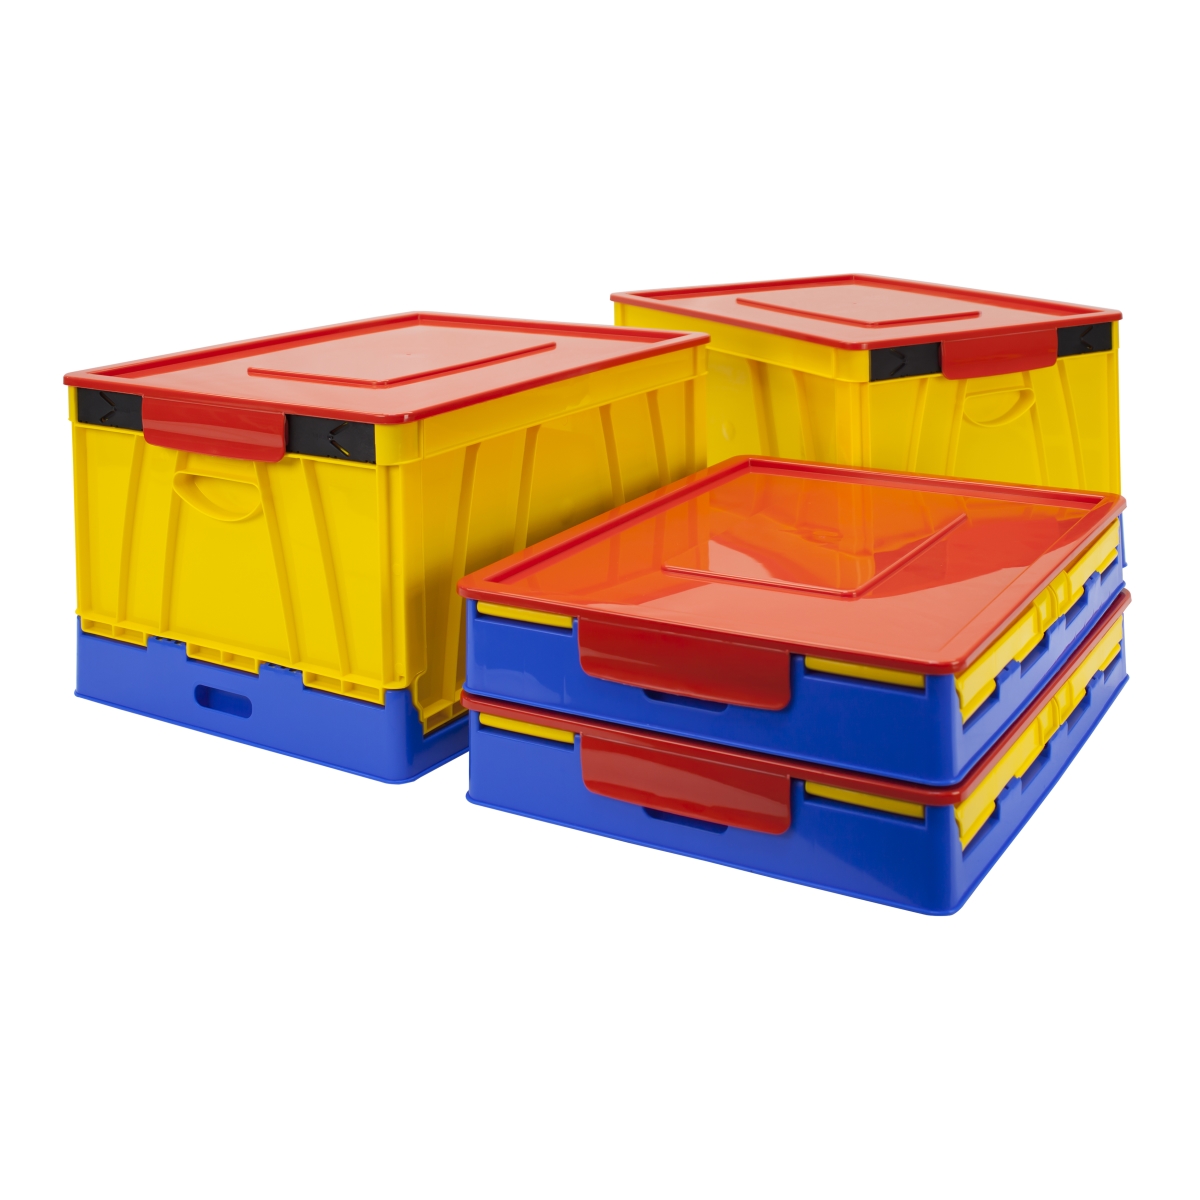 61820u04c Folding Storage Cube With Lid, Assorted Color - Pack Of 4